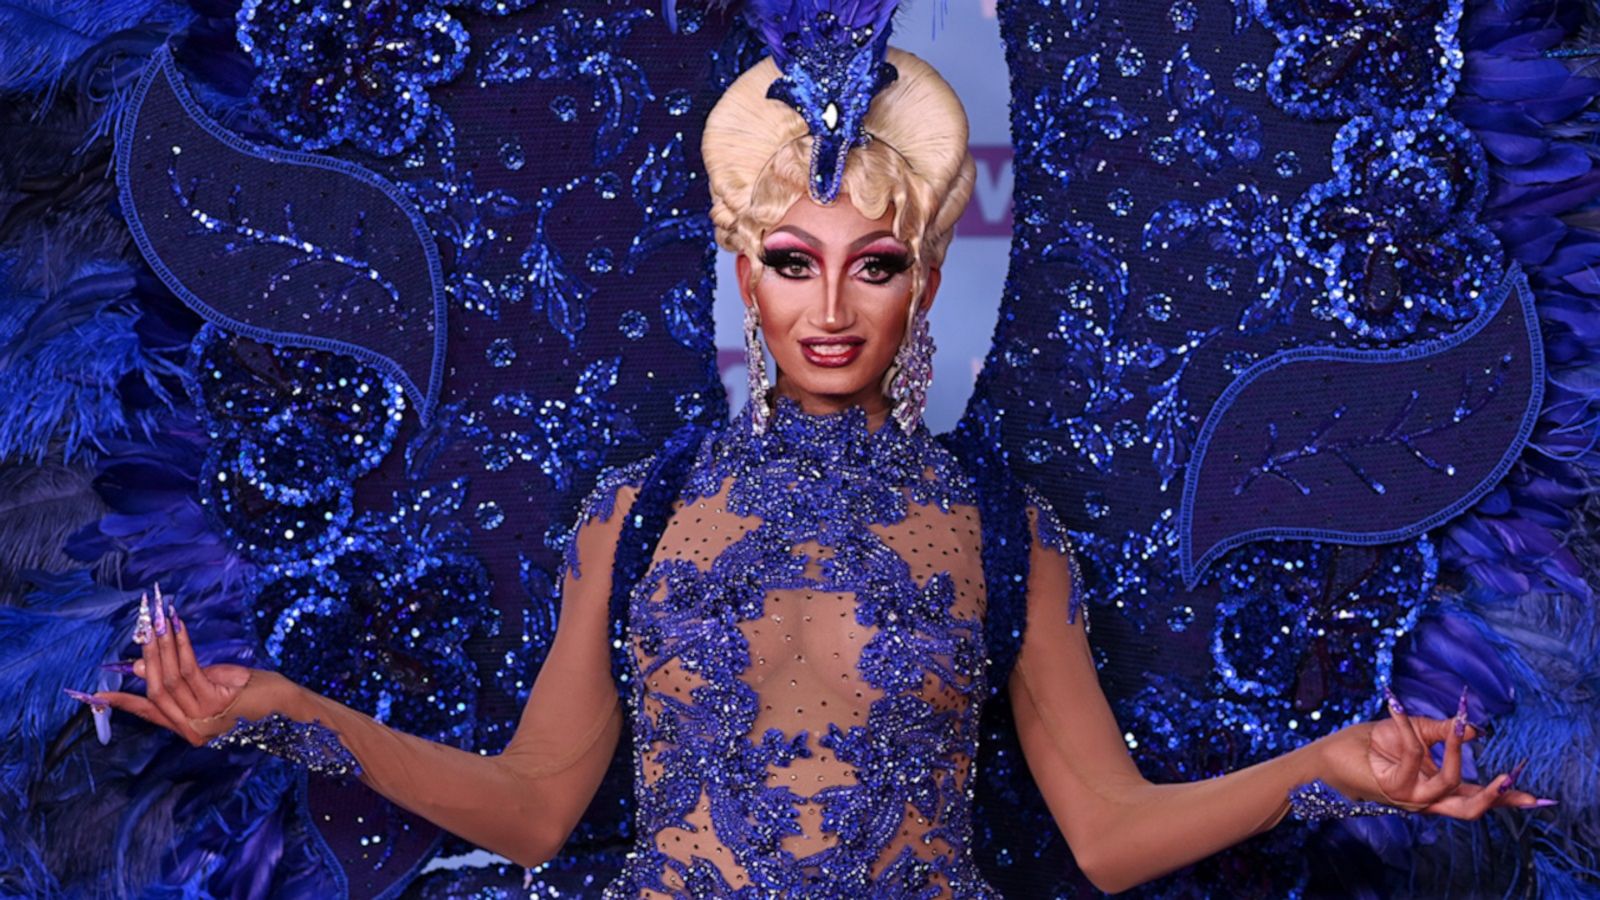 'Just be you': Queens spill the tea on 'Drag Race' red carpet - Good ...